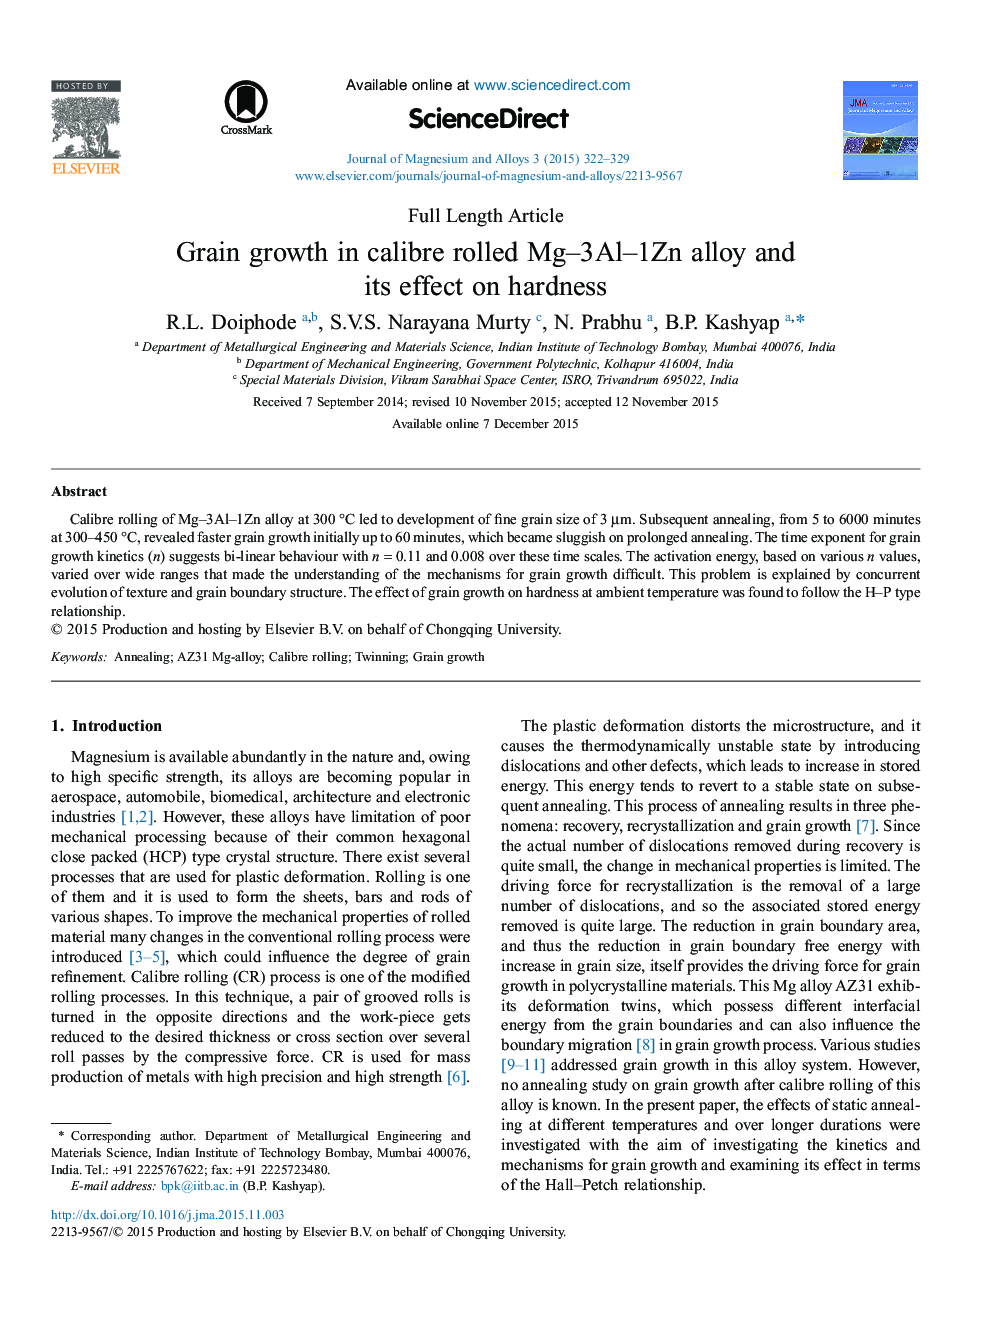 Grain growth in calibre rolled Mg–3Al–1Zn alloy and its effect on hardness